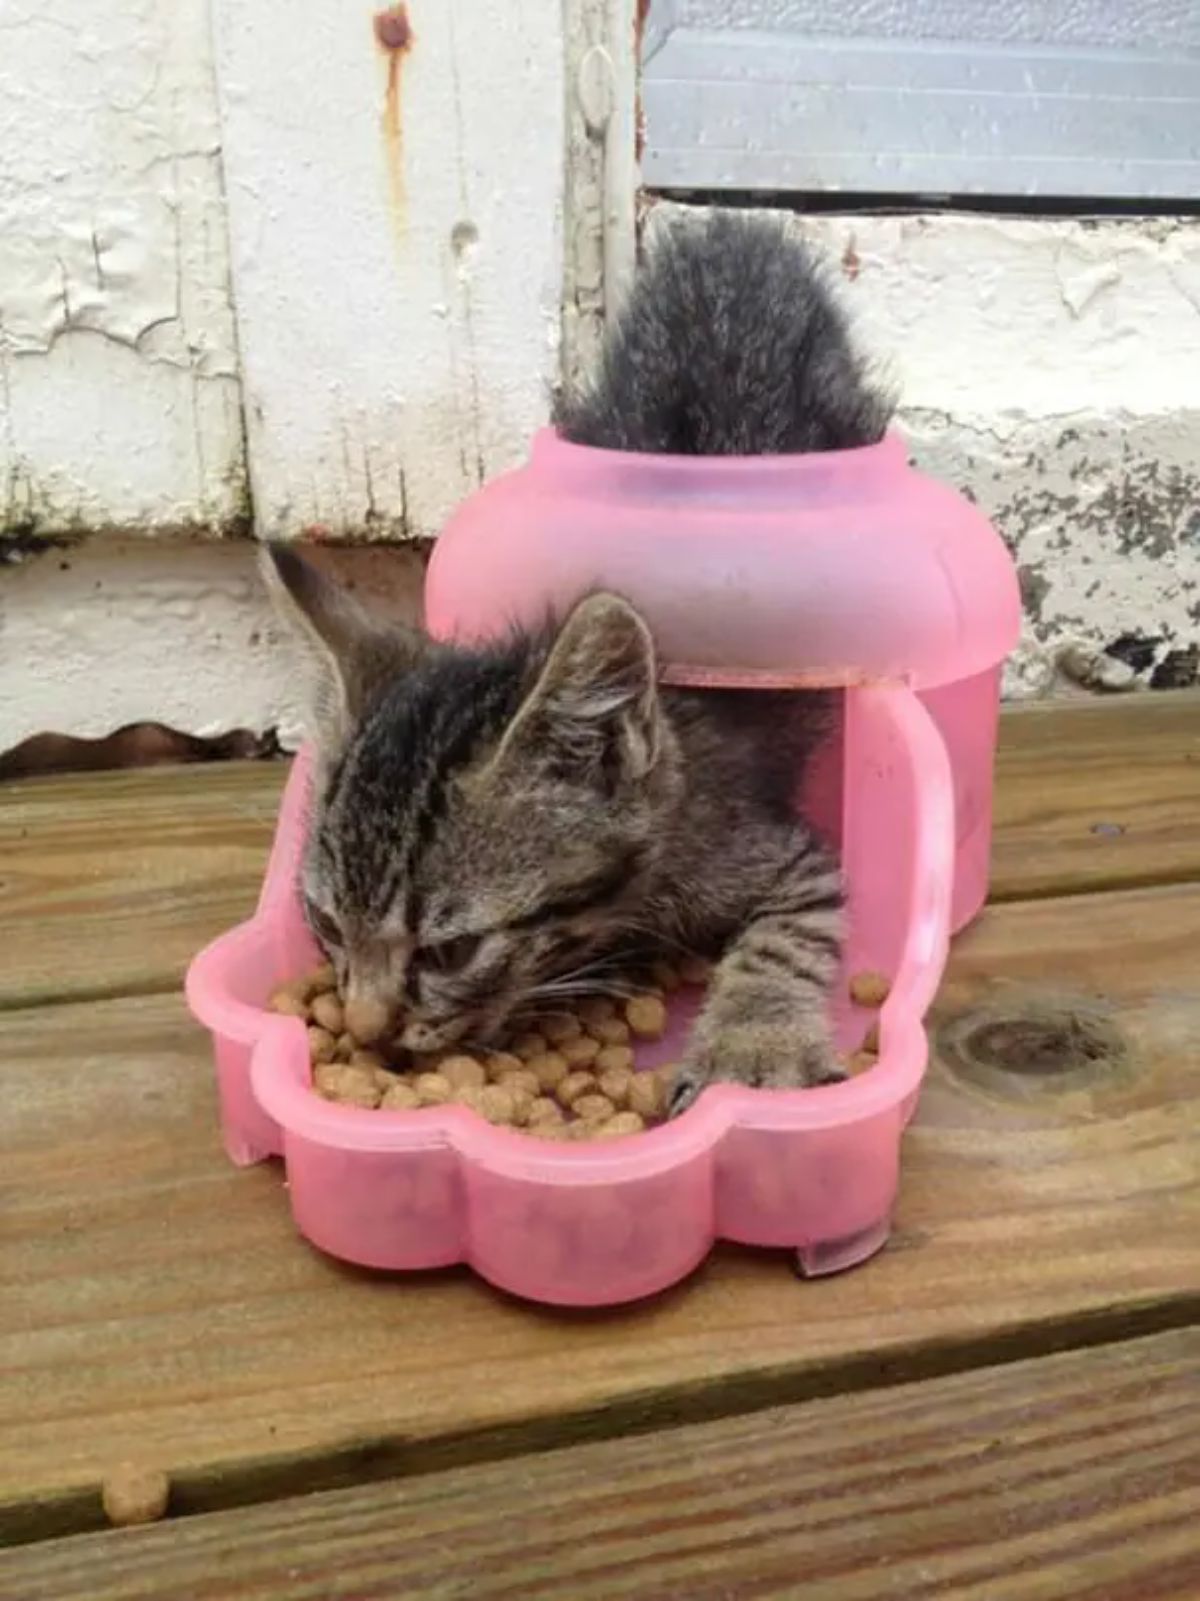 grey tabby kitten inside a pink plastic feeder eating the food in the bottom bowl part